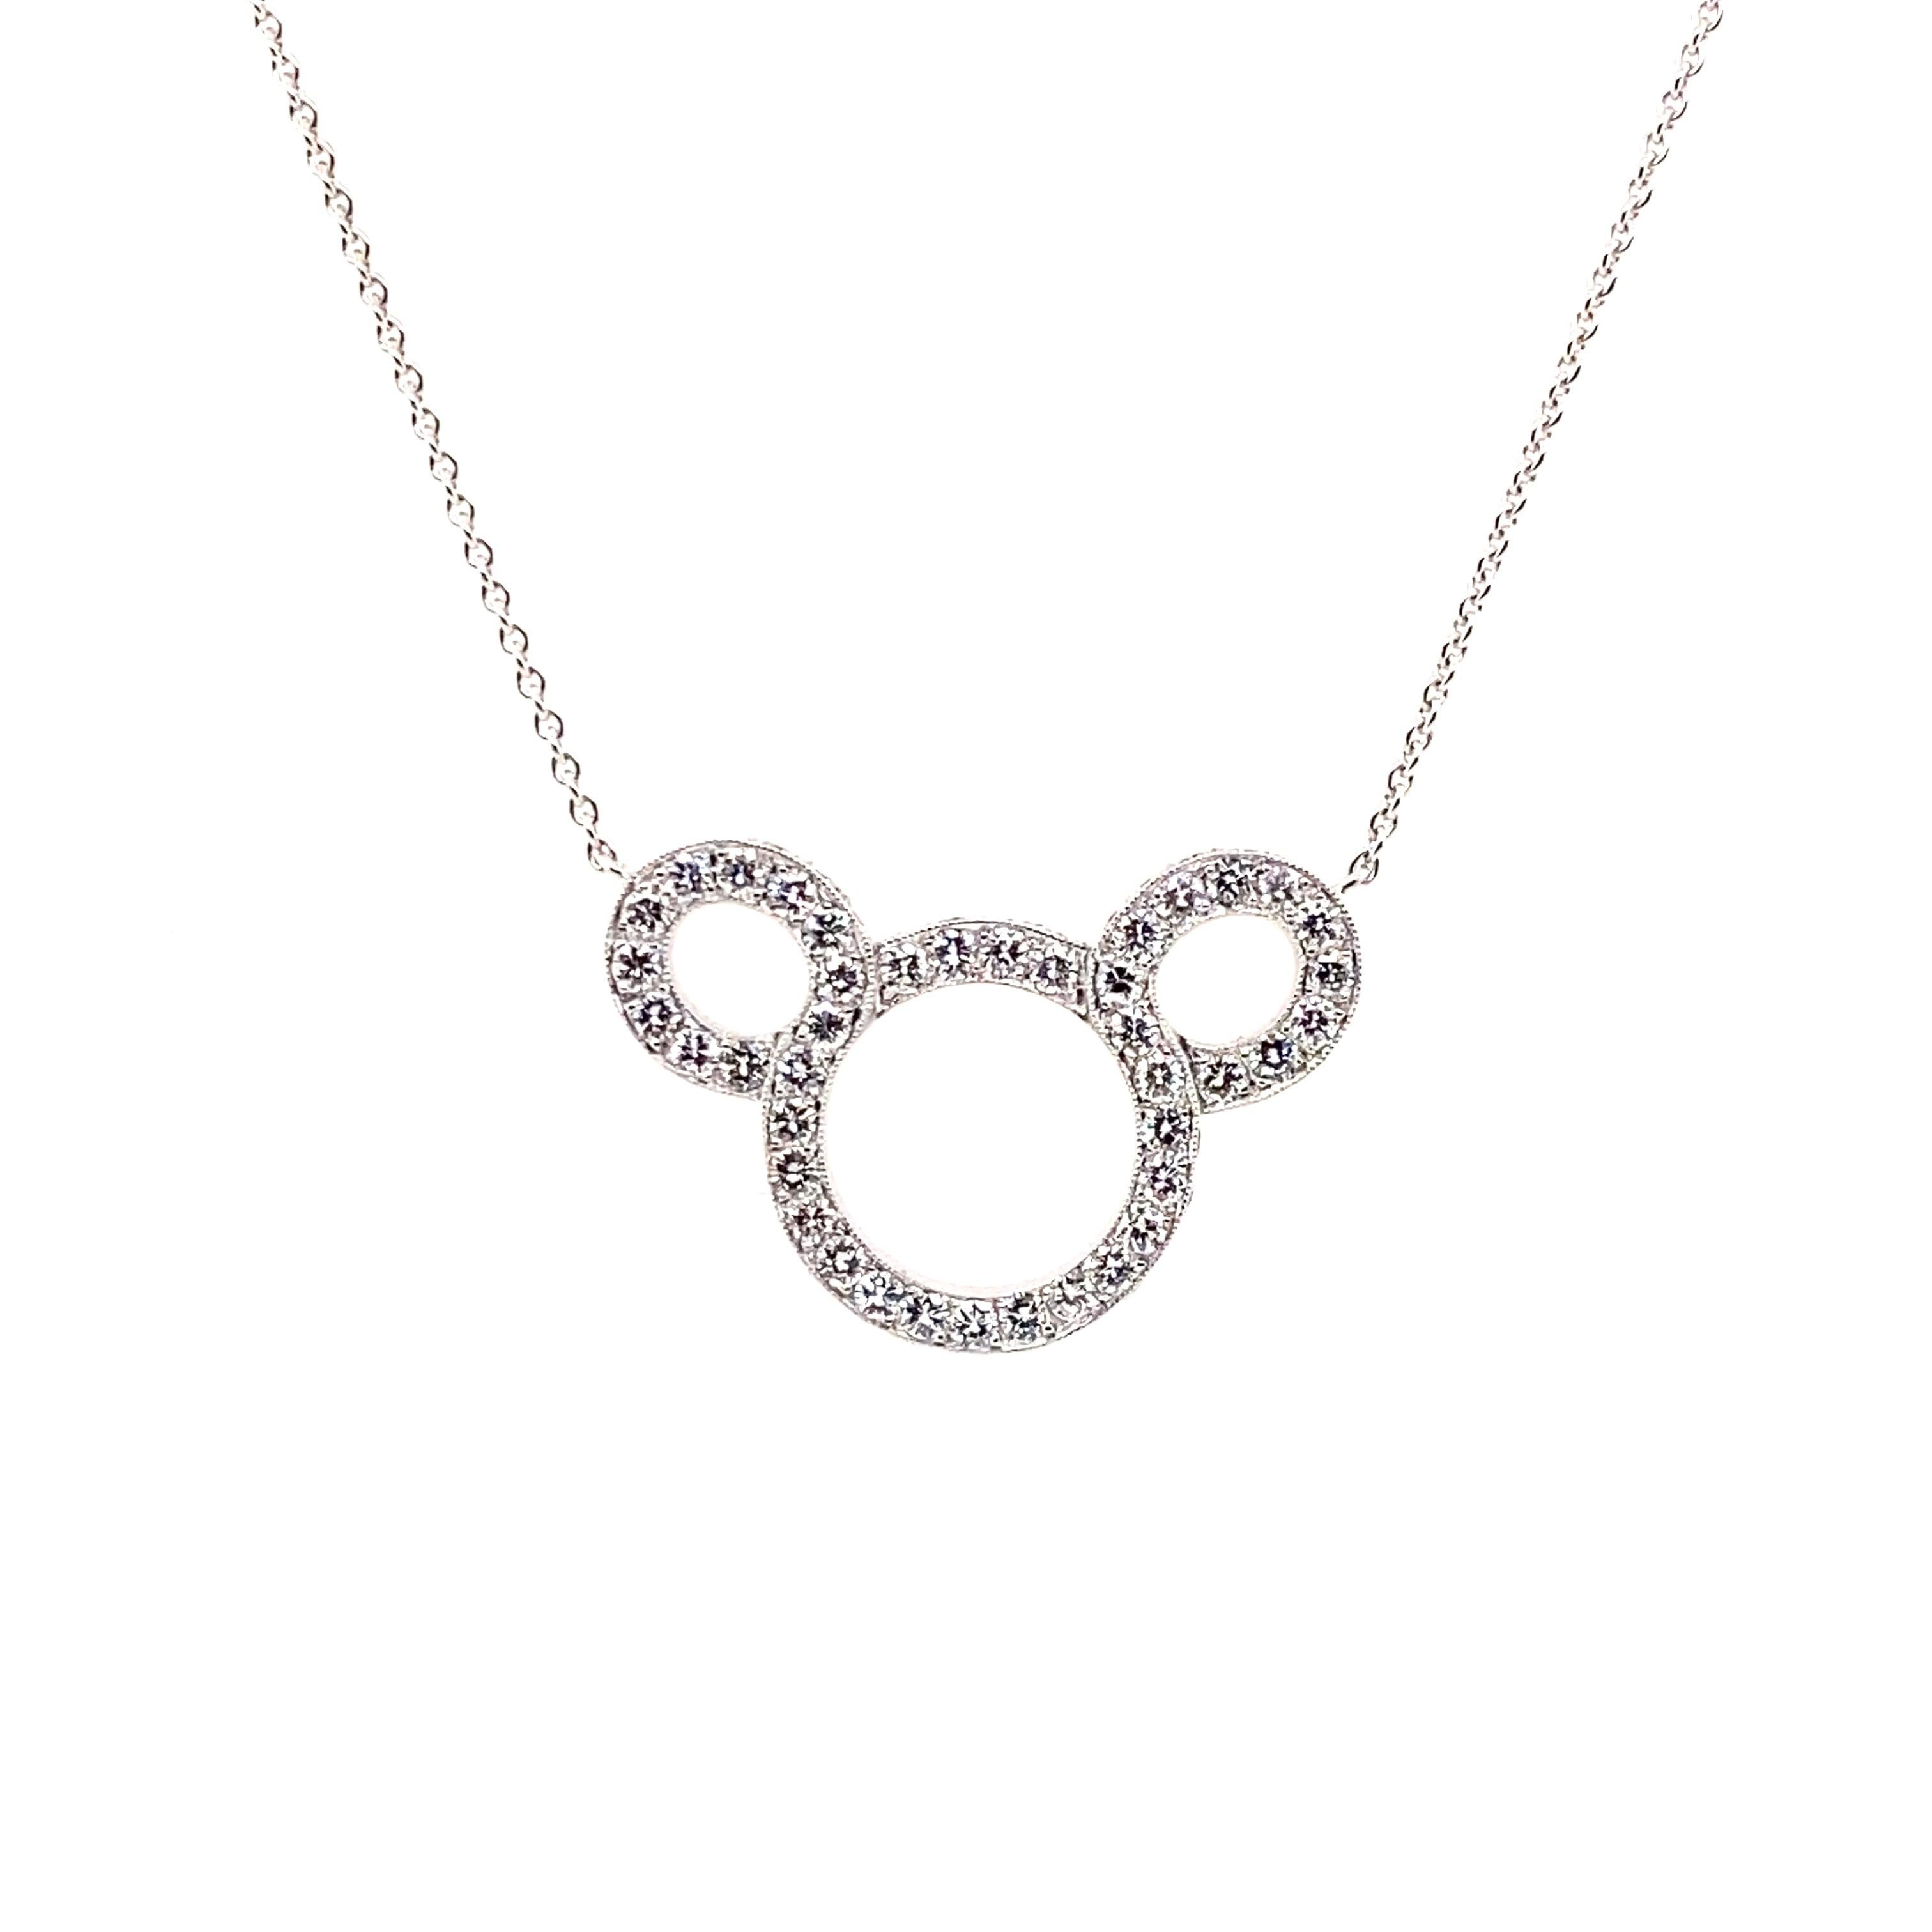 Very cute Mickey Mouse pendant necklace in 18 karat white gold. The pendant is set with 68 brilliant-cut diamonds totalling approximate 1.36 carats. The diamonds are of fine G/H-vs quality. 

Beautiful fine anker chain with spring feather clasp also